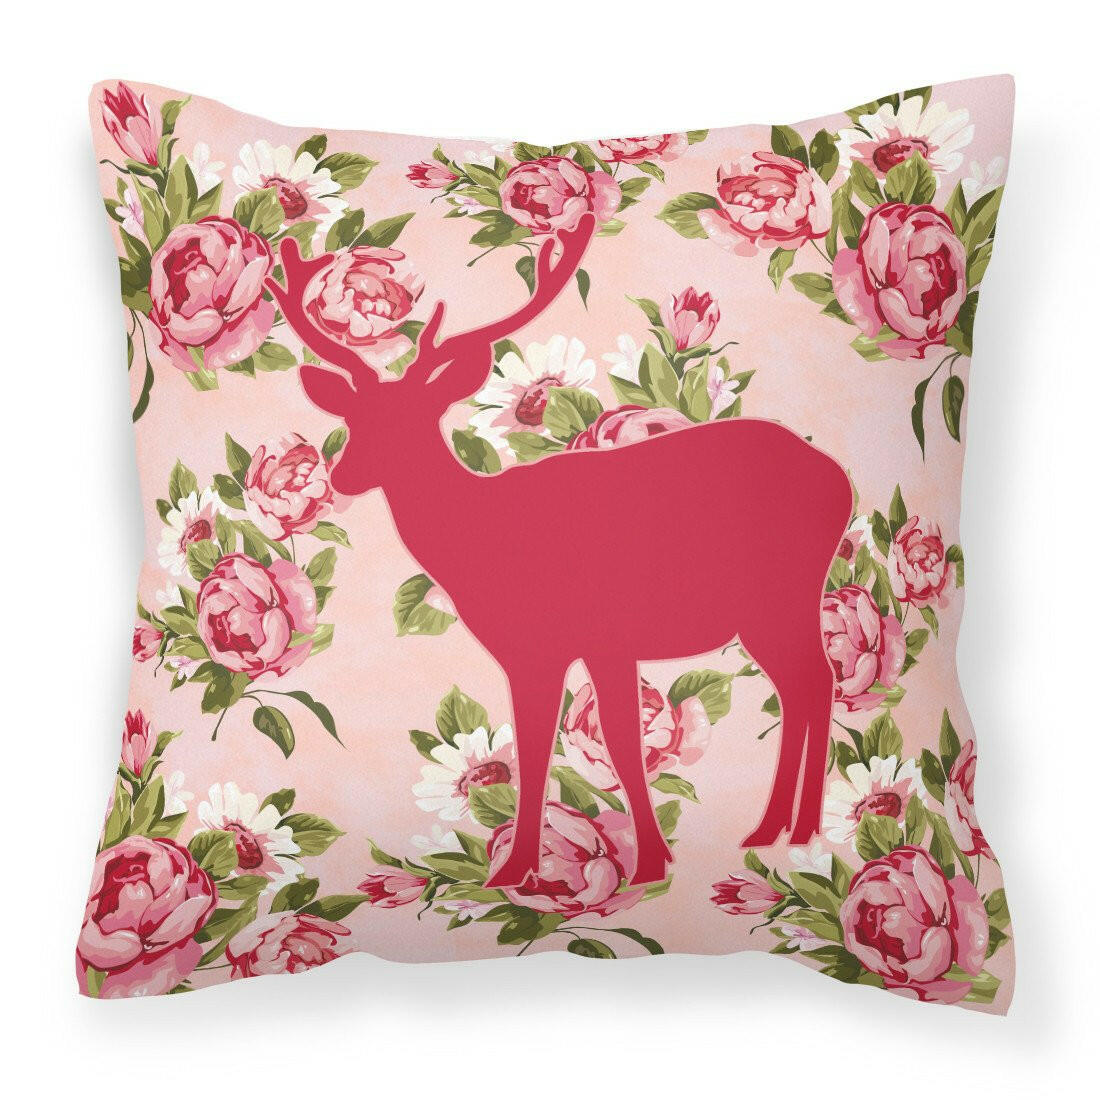 Deer Shabby Chic Pink Roses  Fabric Decorative Pillow BB1012-RS-PK-PW1414 - the-store.com